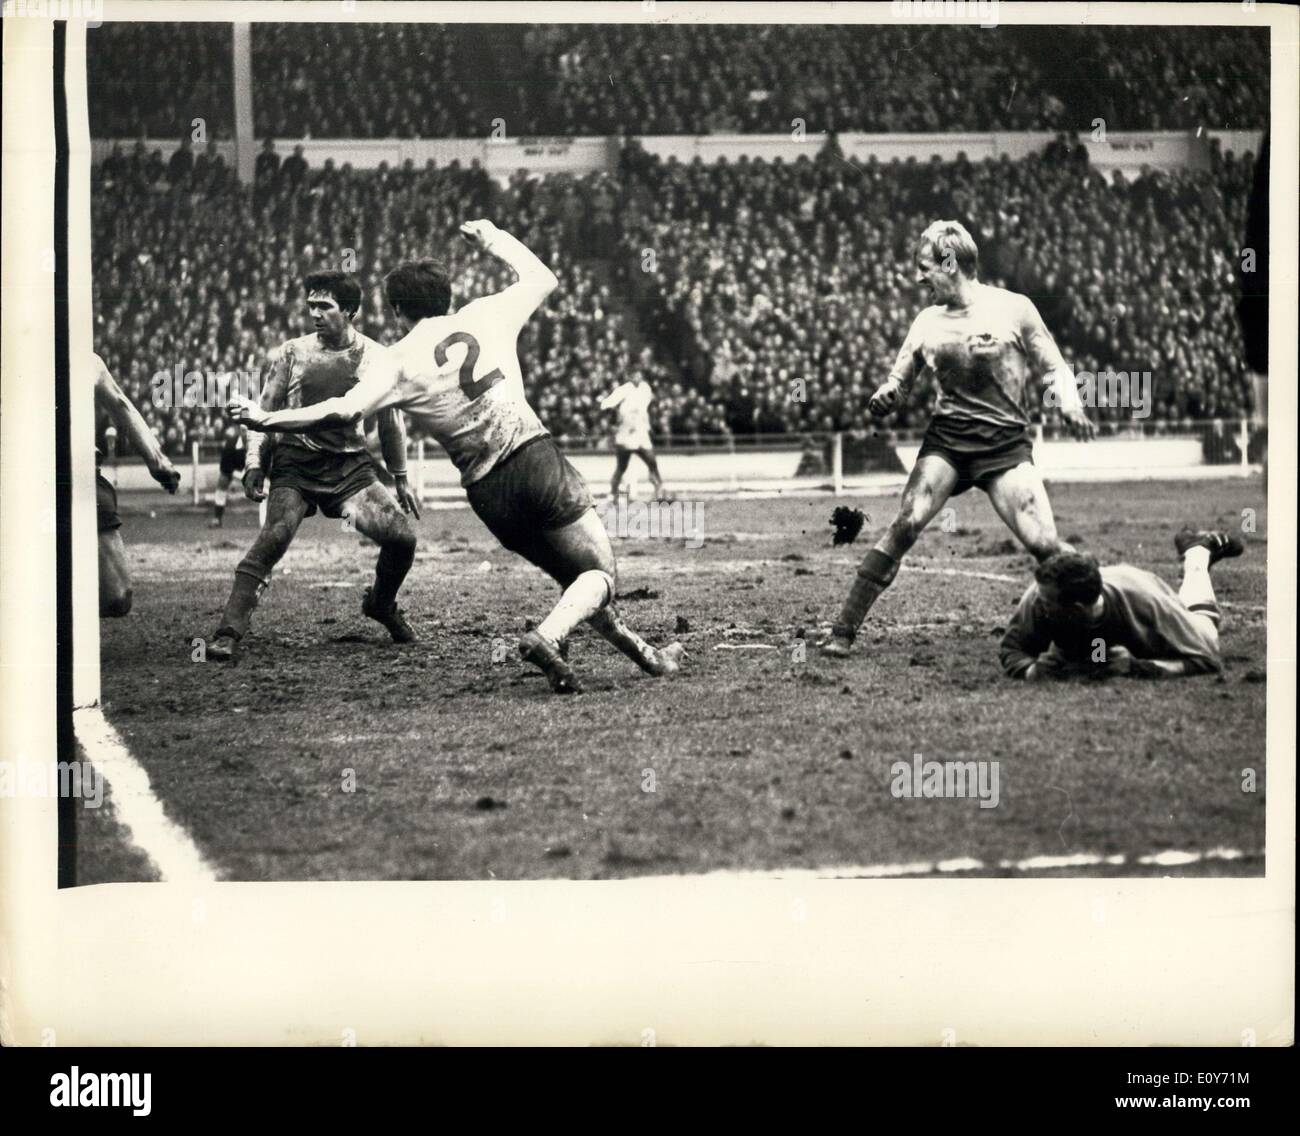 Mar. 16, 1969 - The Goal That Cracked Arsenal: Four Arsenal players watch helplessly as the bail hit by Swindon Town';s Don Rogers (unshown) enters the net, in the league Cup final match at Wembley, London, March 15. Photo Shows Bobby Gould; Peter Storey; Ian Ure and Goalie Bob Wilson (on ground). It was Swindon's Town's Second goal scored in the extra times, after Bobby Gould goal few minuted before the end had forced the match into extra this. Swindon town won 3-1. Stock Photo